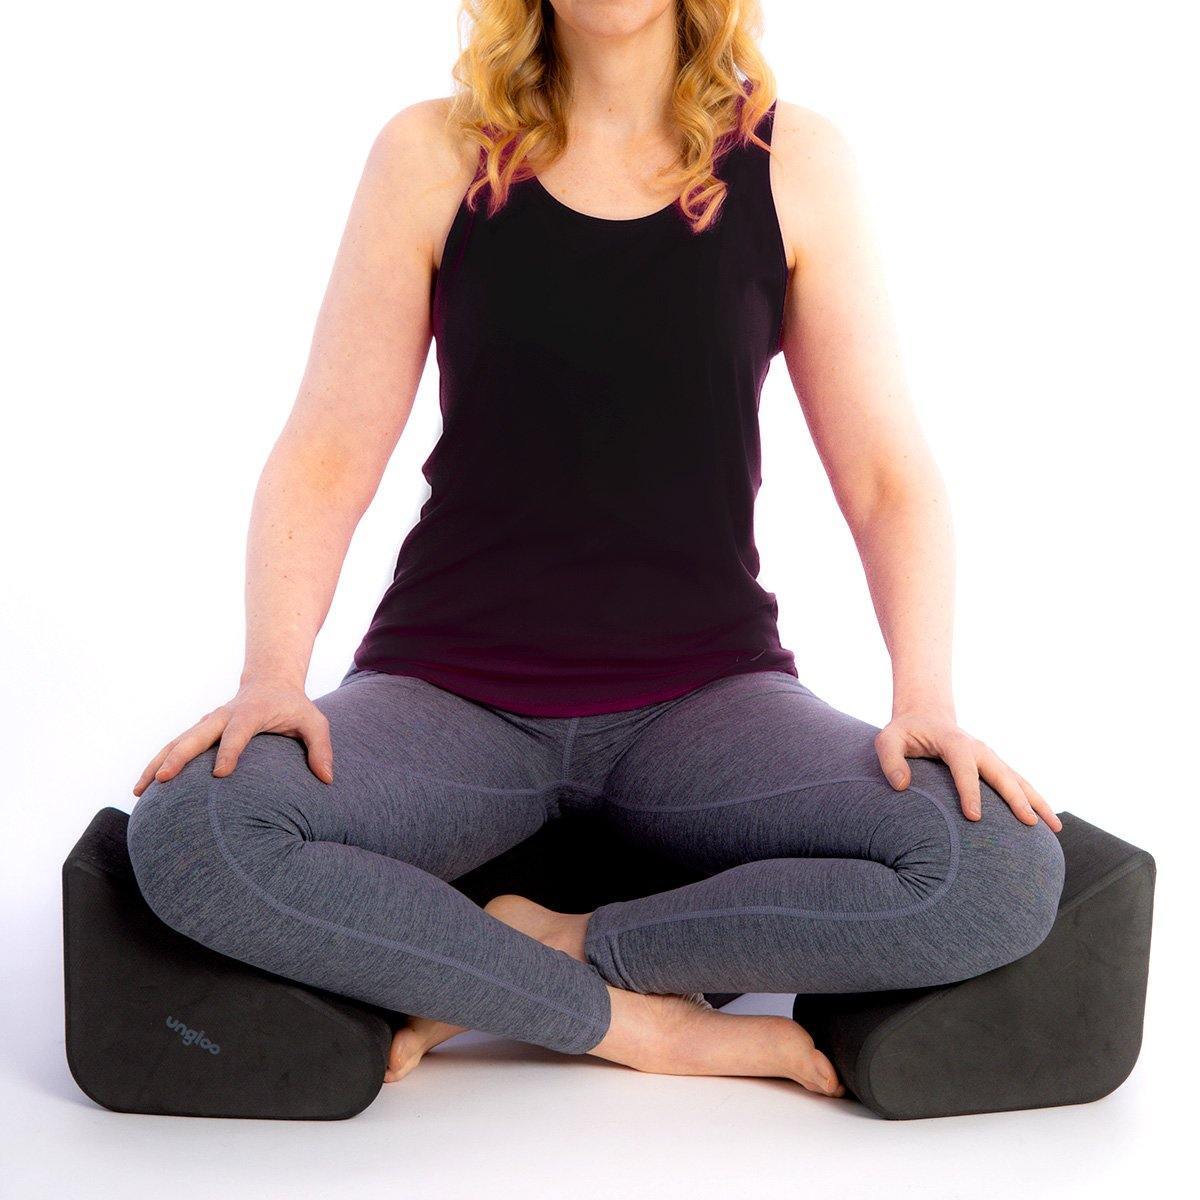 Picture of woman using the sitblox meditation supports for her knees and hips.